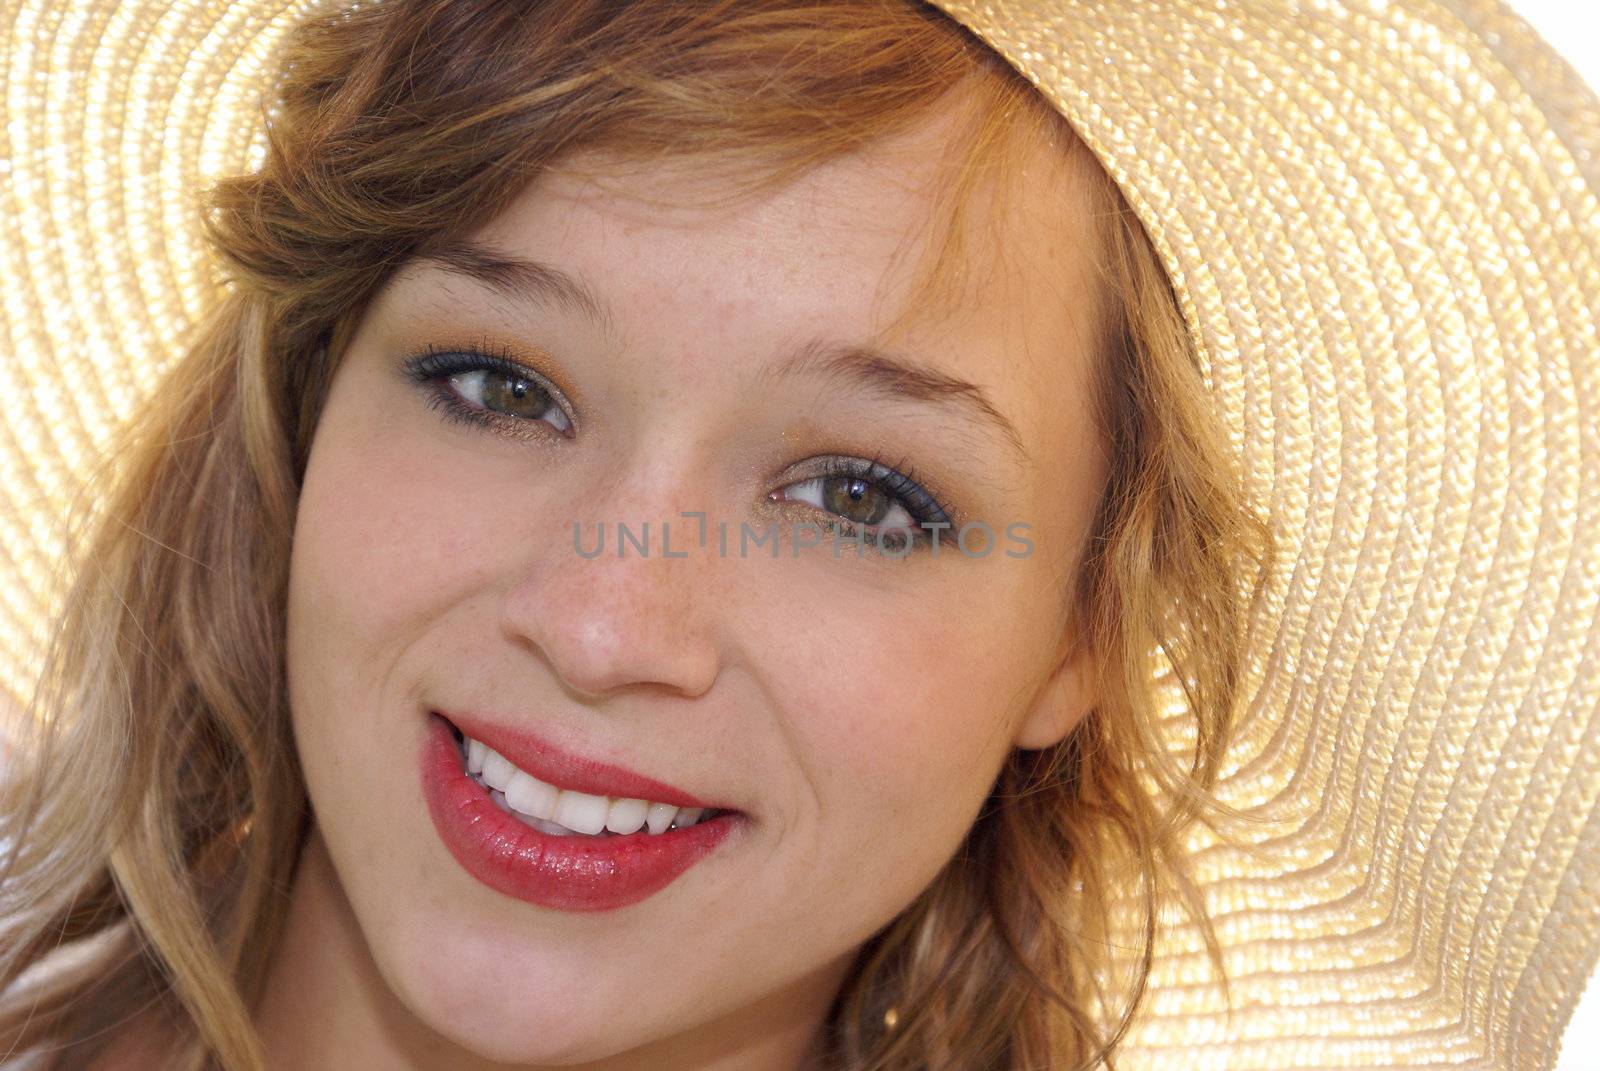 A closeup of a young Woman in a sun hat.